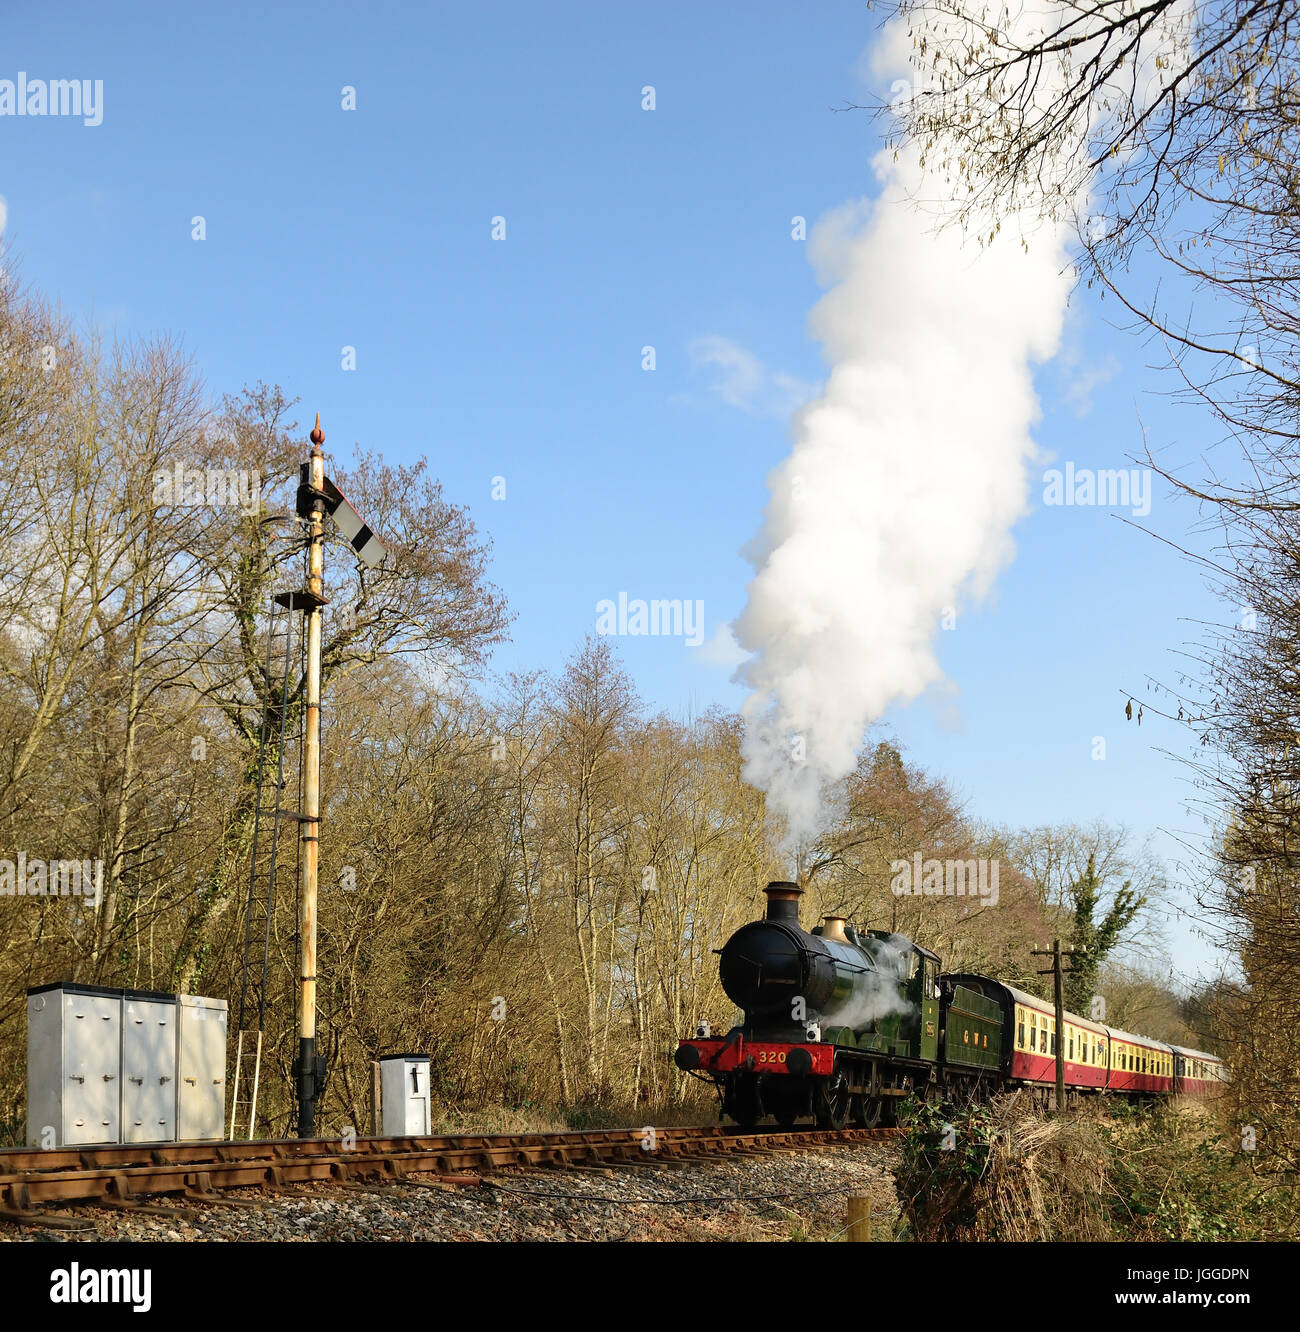 Steam train on the South Devon Railway, approaching Staverton, hauled by GWR 2251 class 0-6-0 No 3205. Stock Photo